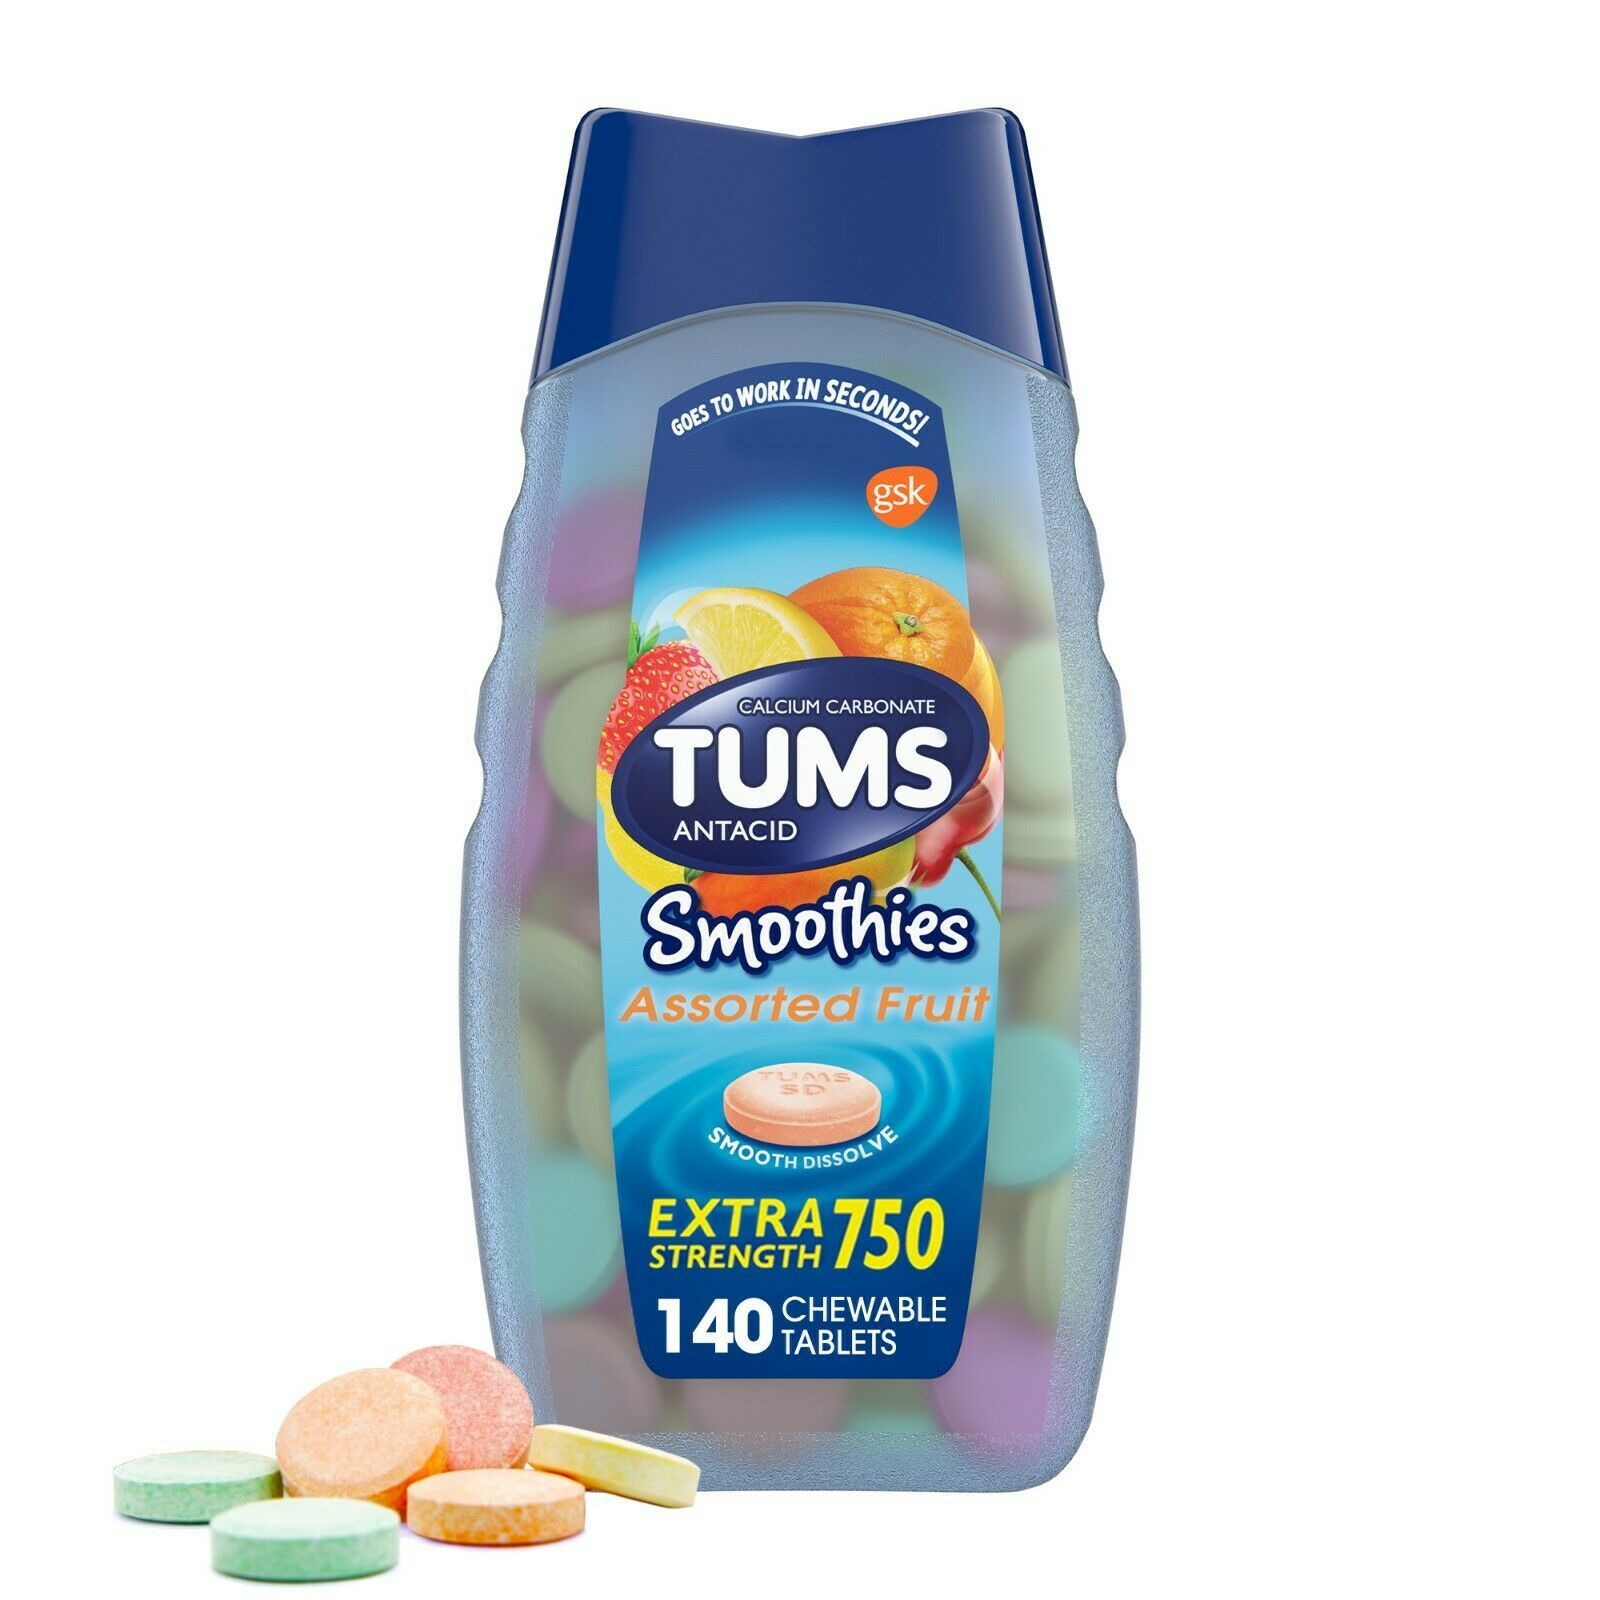 Primary image for 2 PACK TUMS SMOOTHIES ANTACID ASSORTED FRUIT140.0EA XTRA STRENGHT